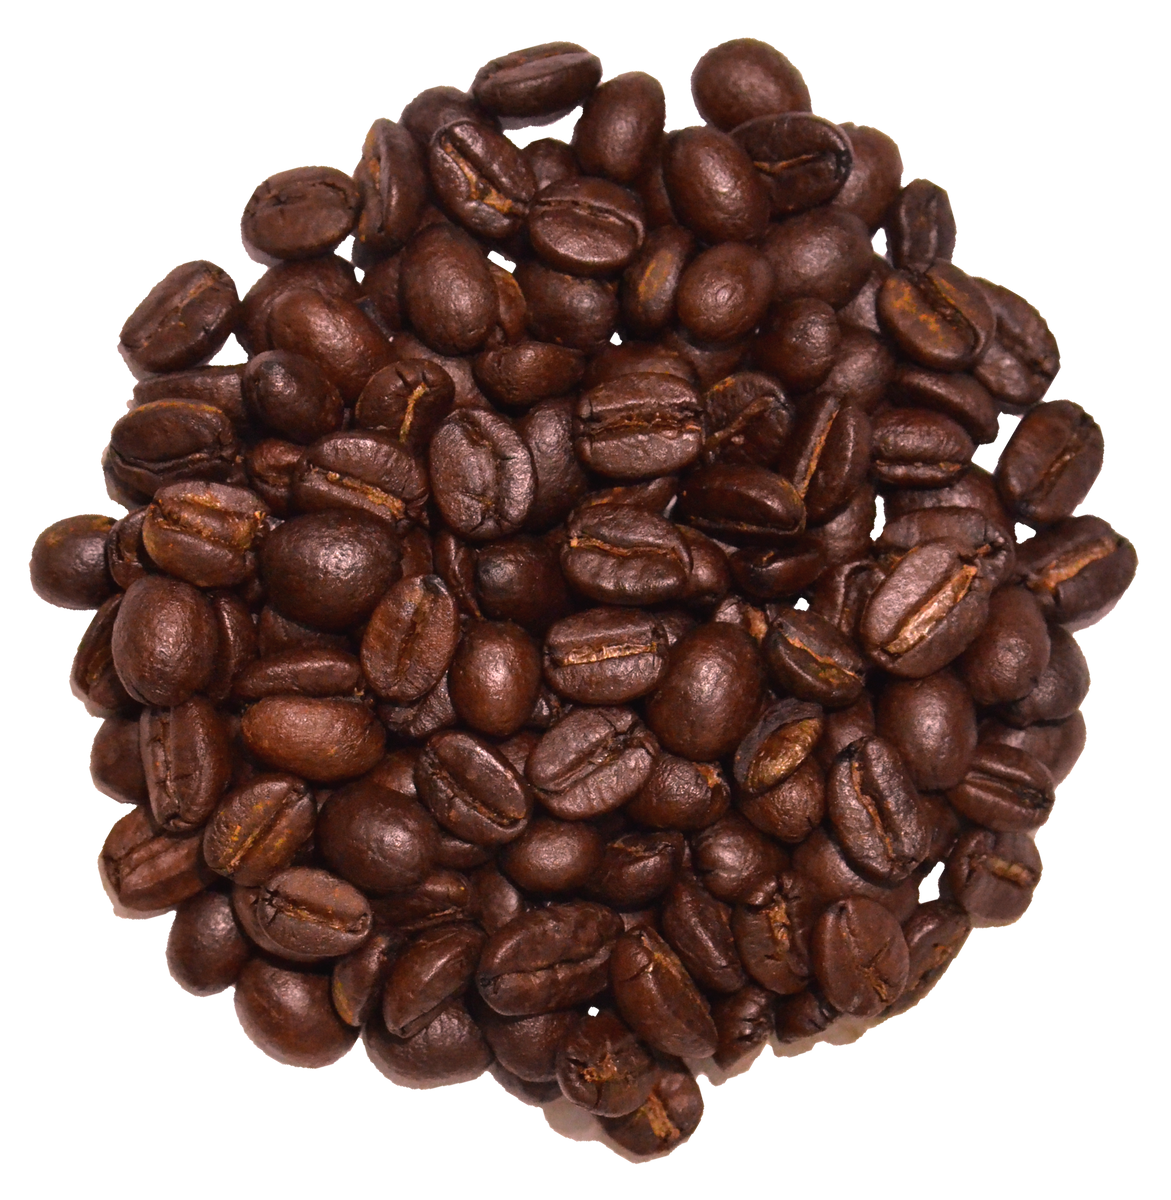 Roasted Coffee Beans Transparent Images